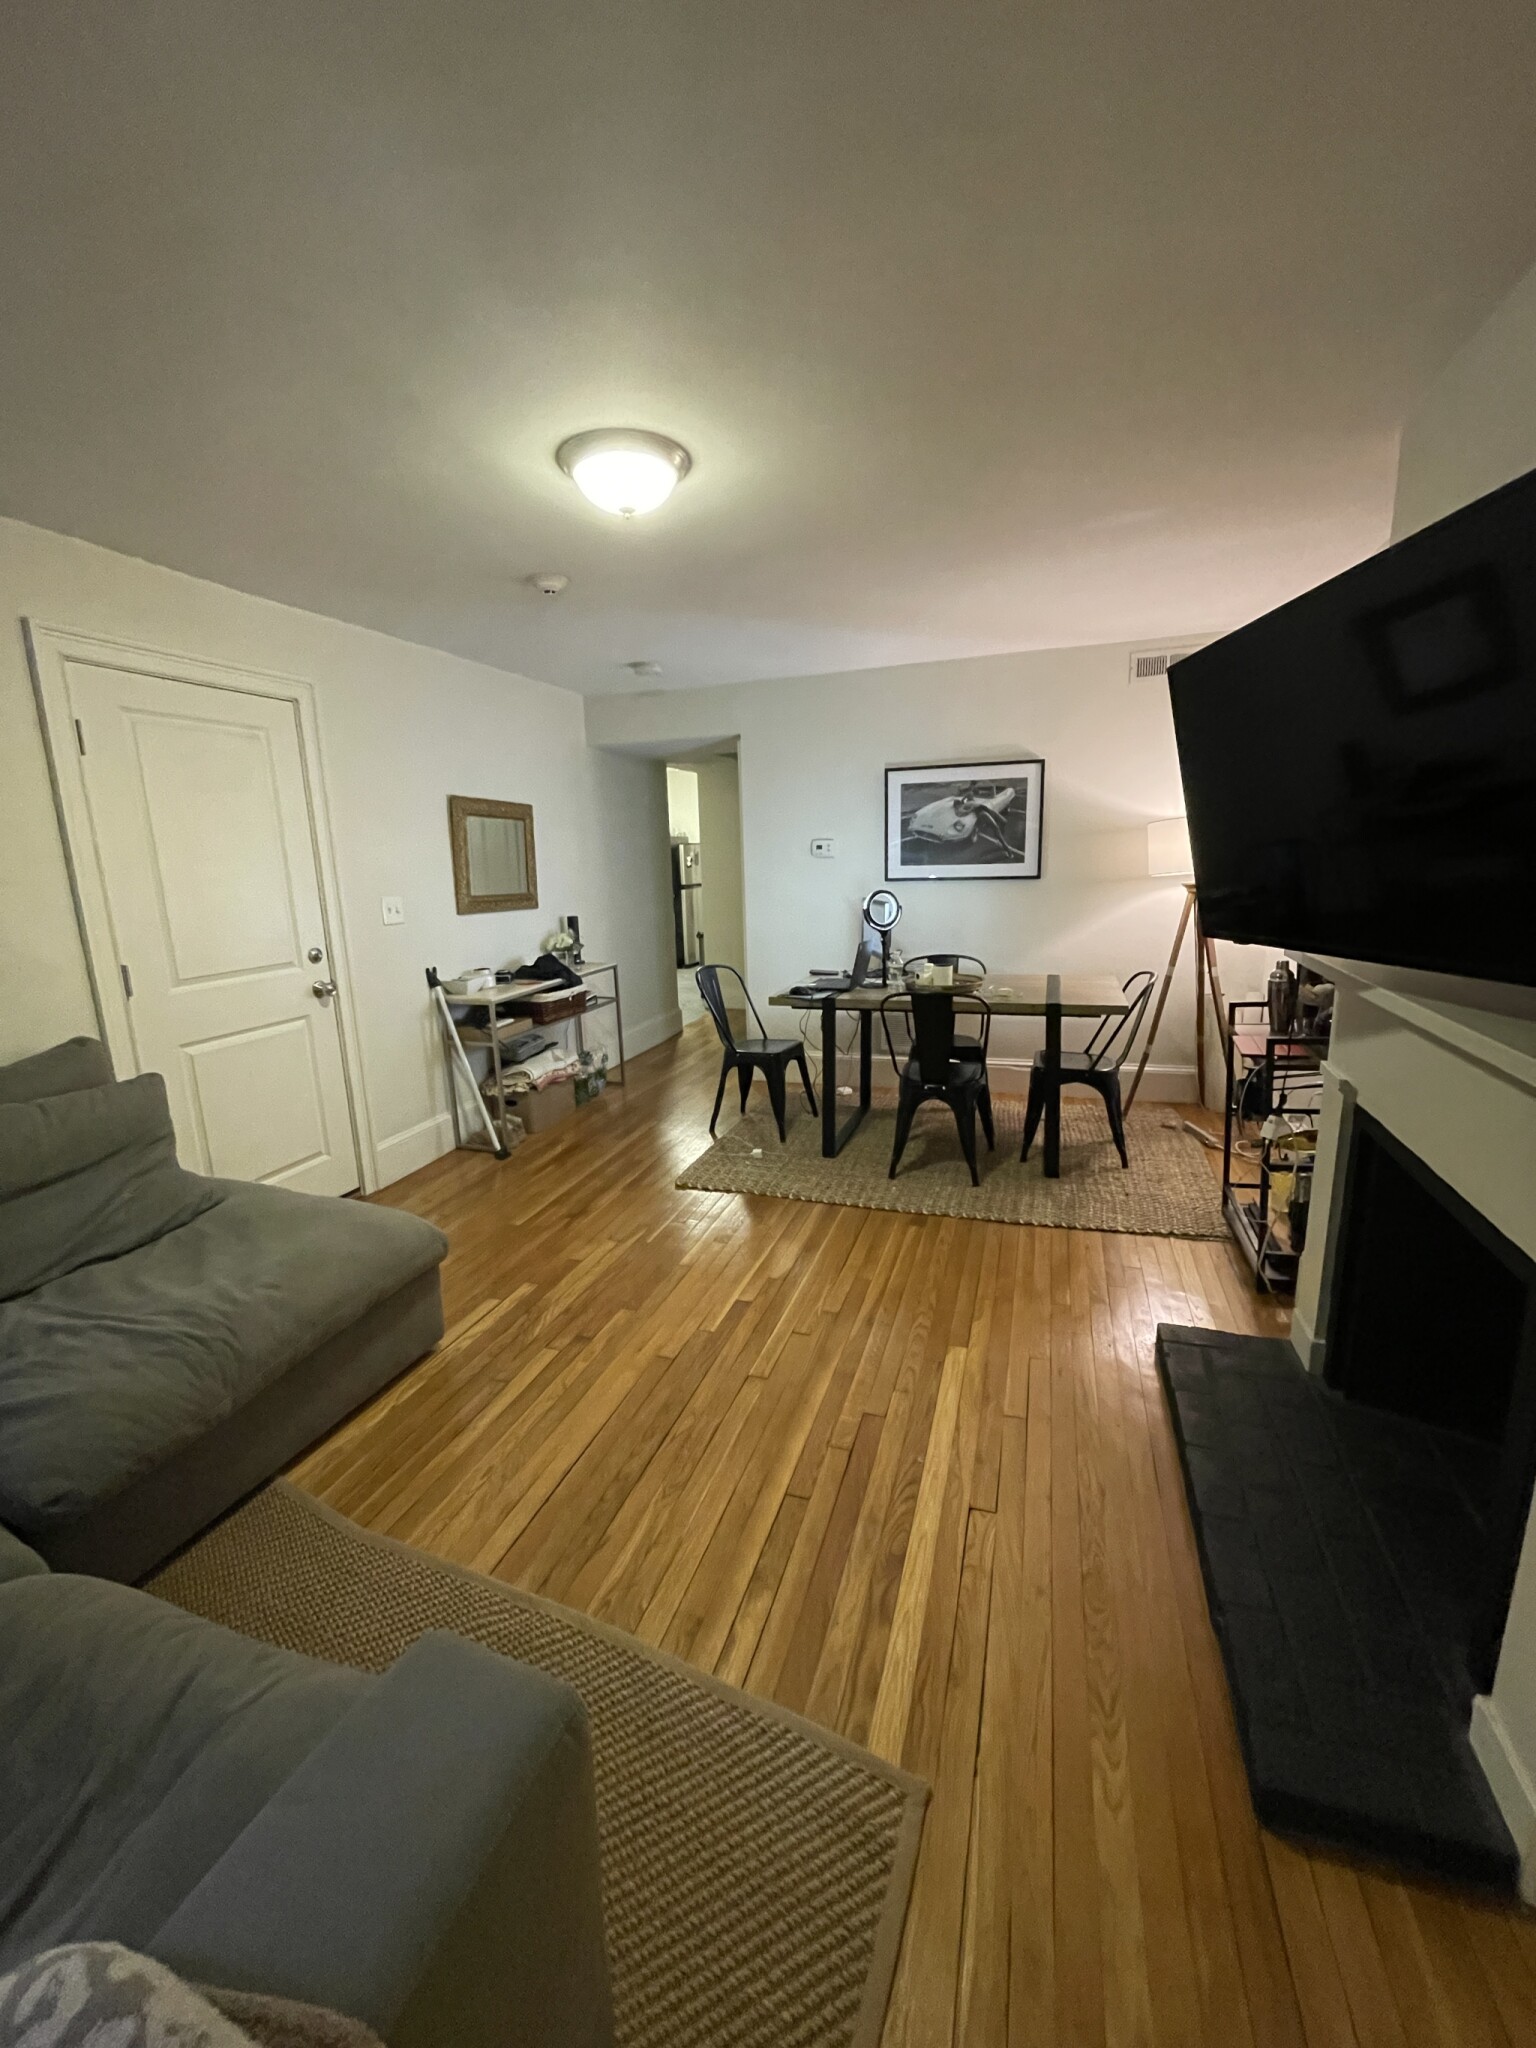 Photos of apartment on Beverly St.,Boston MA 02114